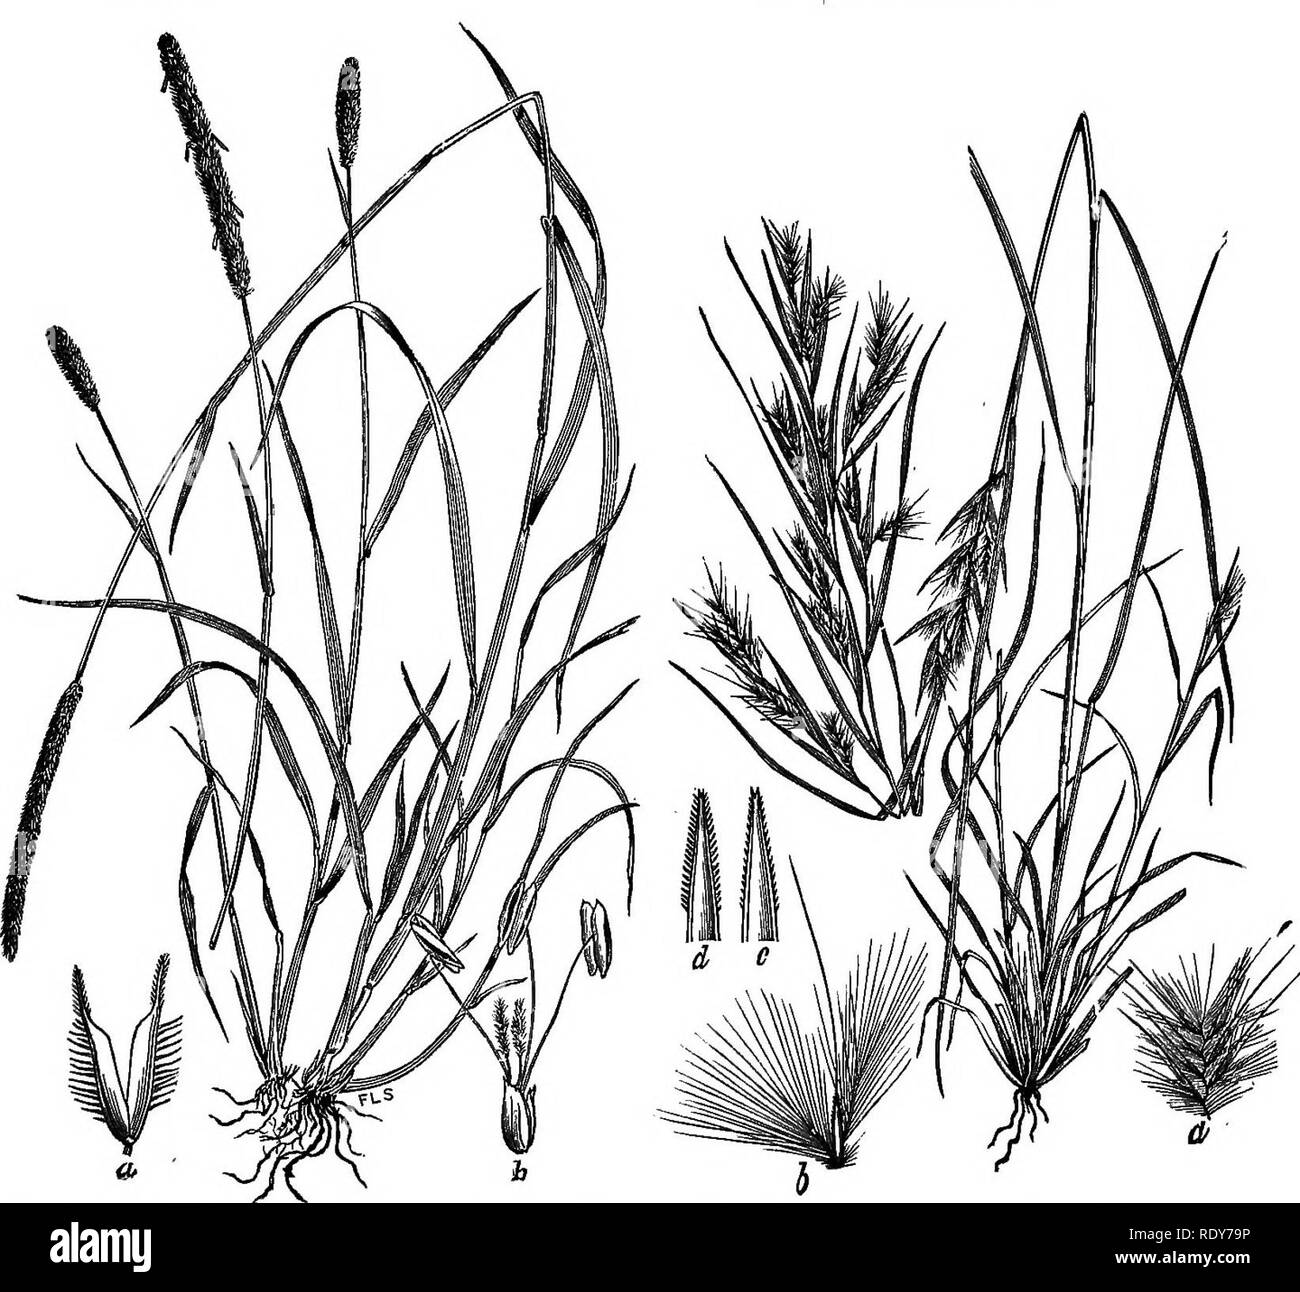 . The families of flowering plants. Plants; Phanerogams. Fig. 24.—Wild rice, Zizania aquatica. (AfterBrittonandBrown.Ill. Fl. North- ern D. S.) Fig. 25.—Minnesota Muilenbergia {Mufilenbergia ambigua). (After Brit- ton, 111. FI. Northern U. S.). Fig. 26.—Timothy grass (Phleumprepense). (After Scribner, Bull. No. 7, Div. of Agrost., U. S. l)ept. of Agrio.) Fig. 27.—Broom grass, Andropogon Yirglnieus. (After Soribner, Bull. No. 7, Diy. of Agrost., U S. Dept. of Agrio.). Please note that these images are extracted from scanned page images that may have been digitally enhanced for readability - col Stock Photo